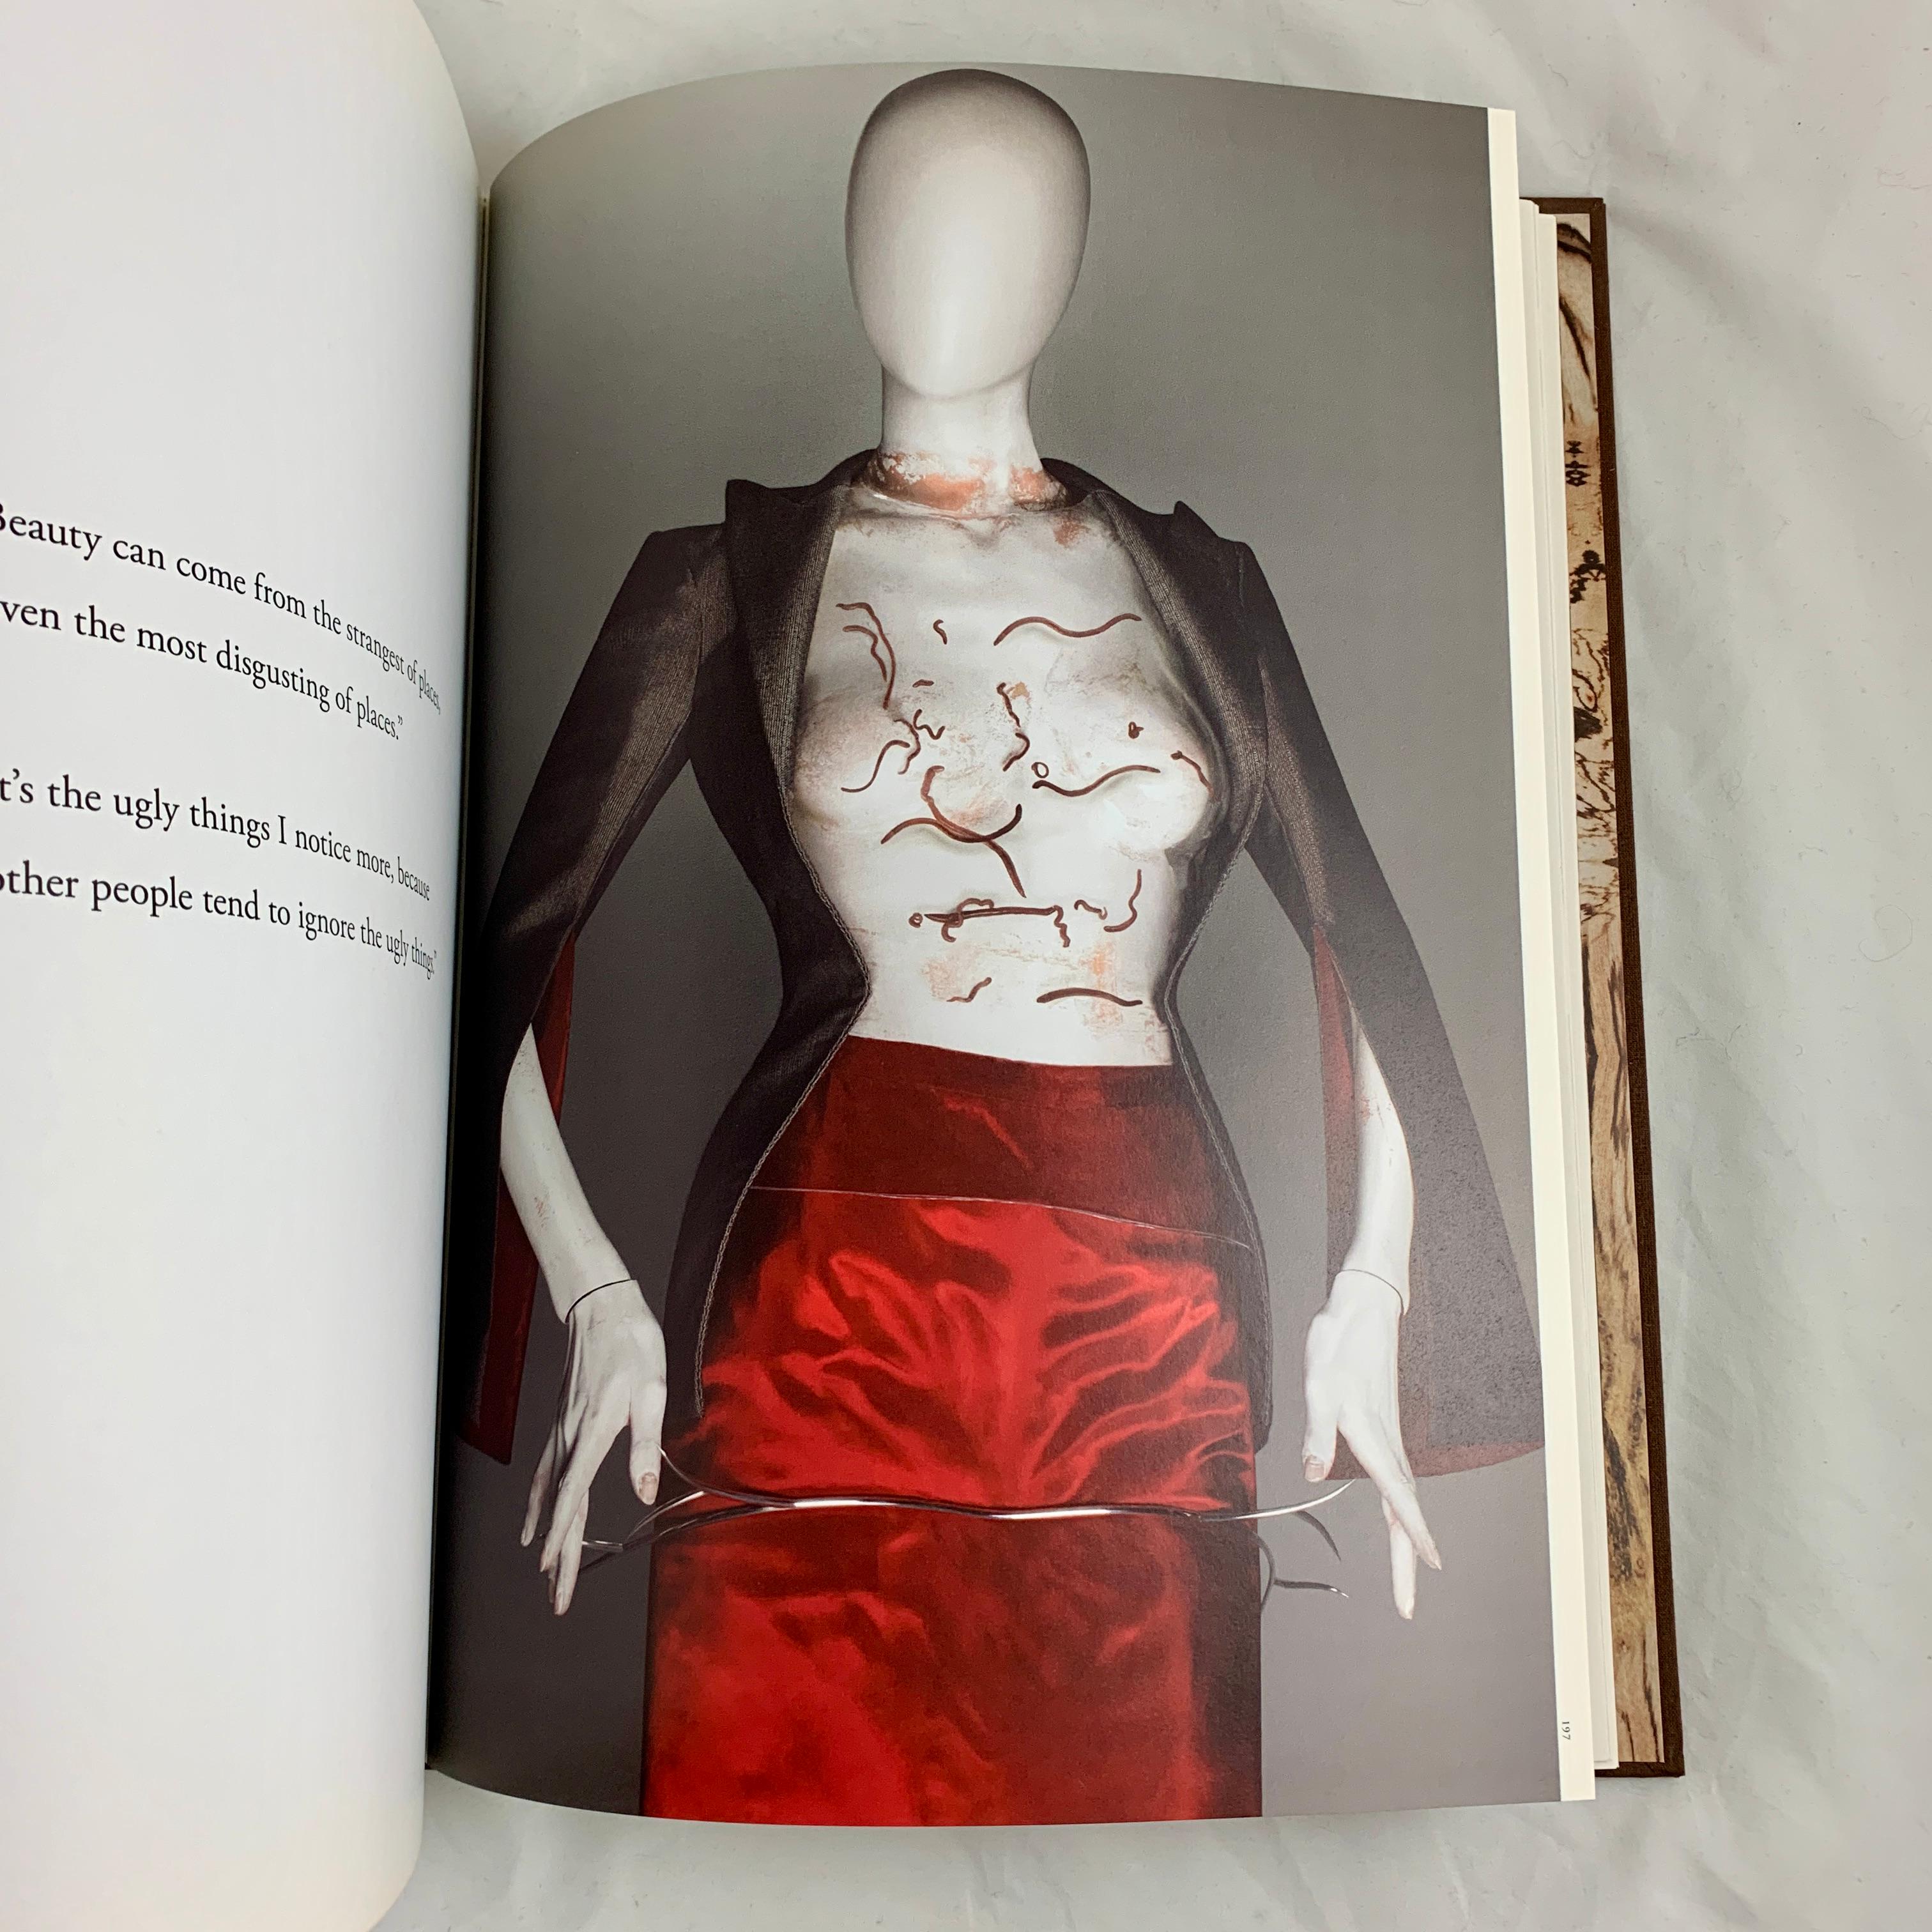 Alexander McQueen: Savage Beauty, Andrew Bolton MOMA Illustrated Hardcover Book 3